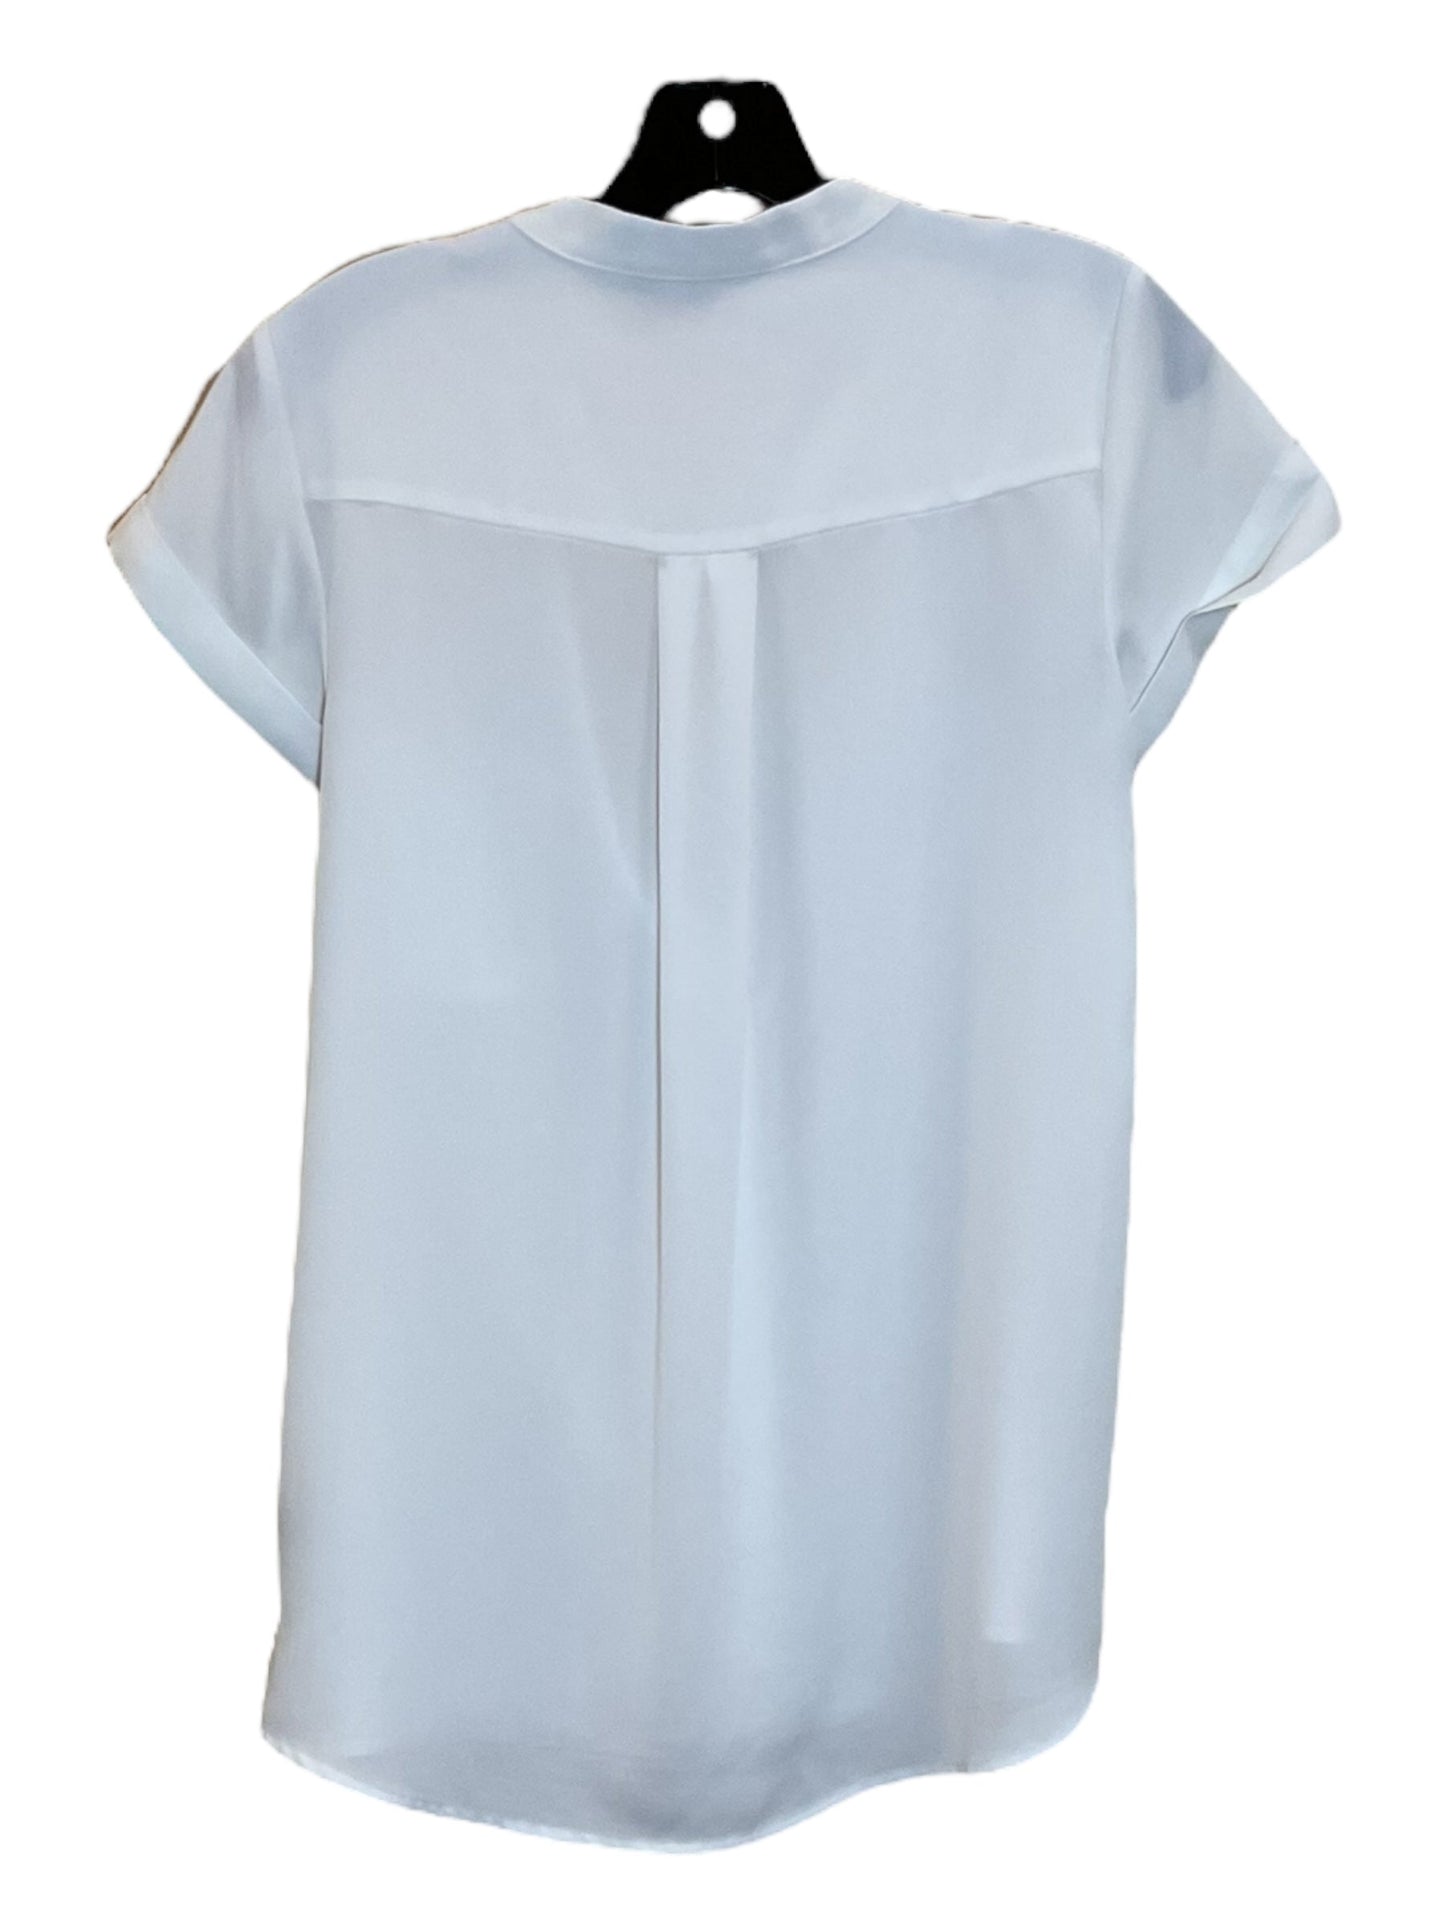 White Top Short Sleeve Simply Vera, Size S